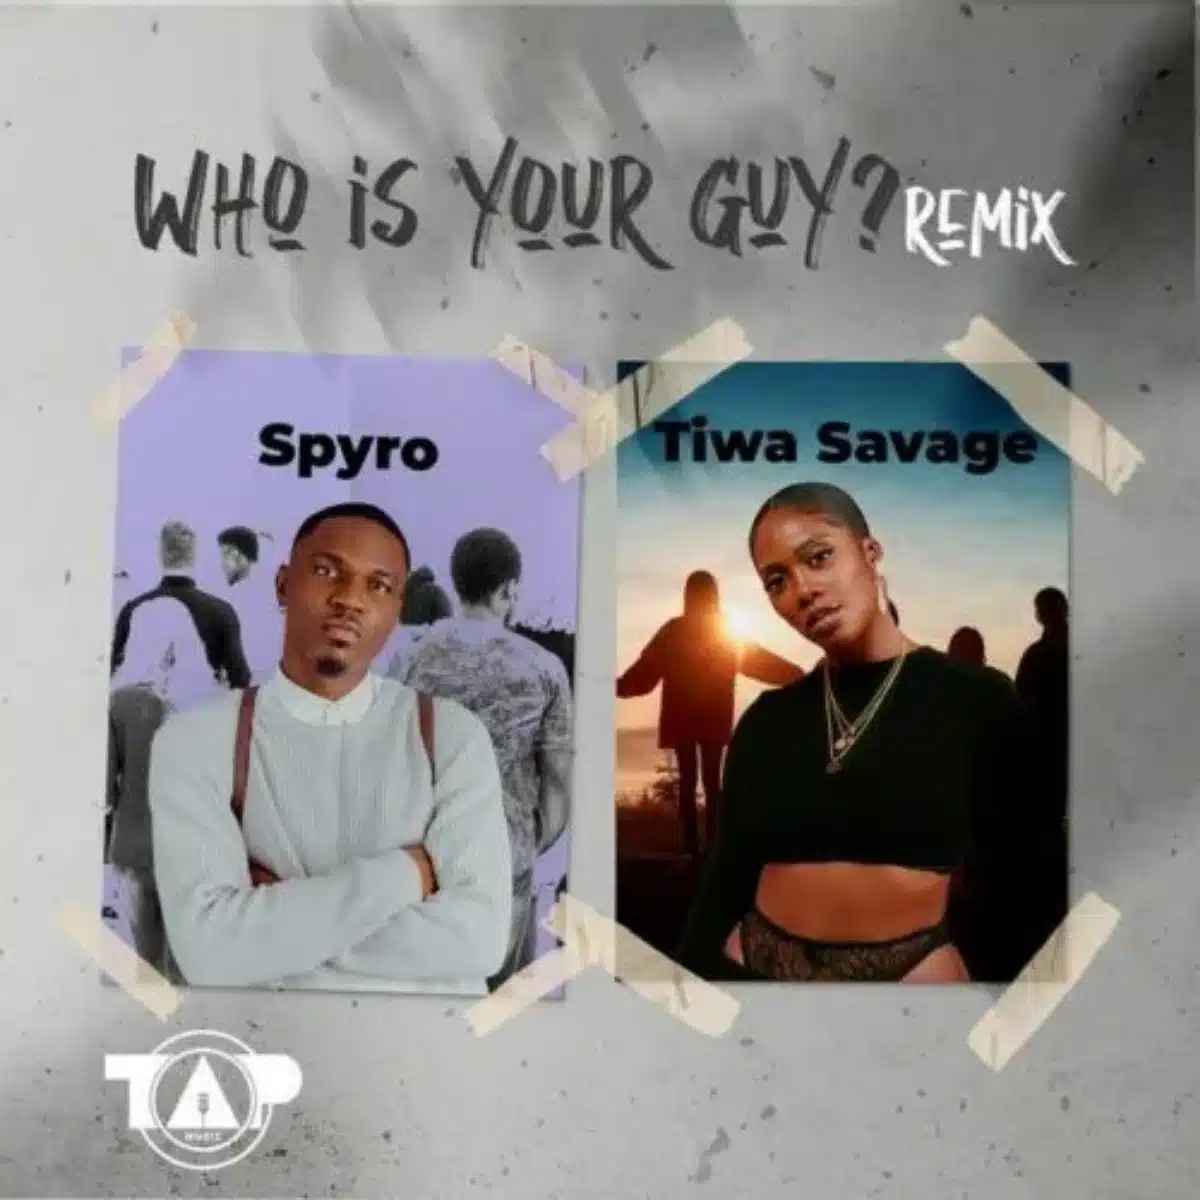 DOWNLOAD: Spyro Ft Tiwa Savage – “Who is your Guy?” Remix (Video & Audio) Mp3